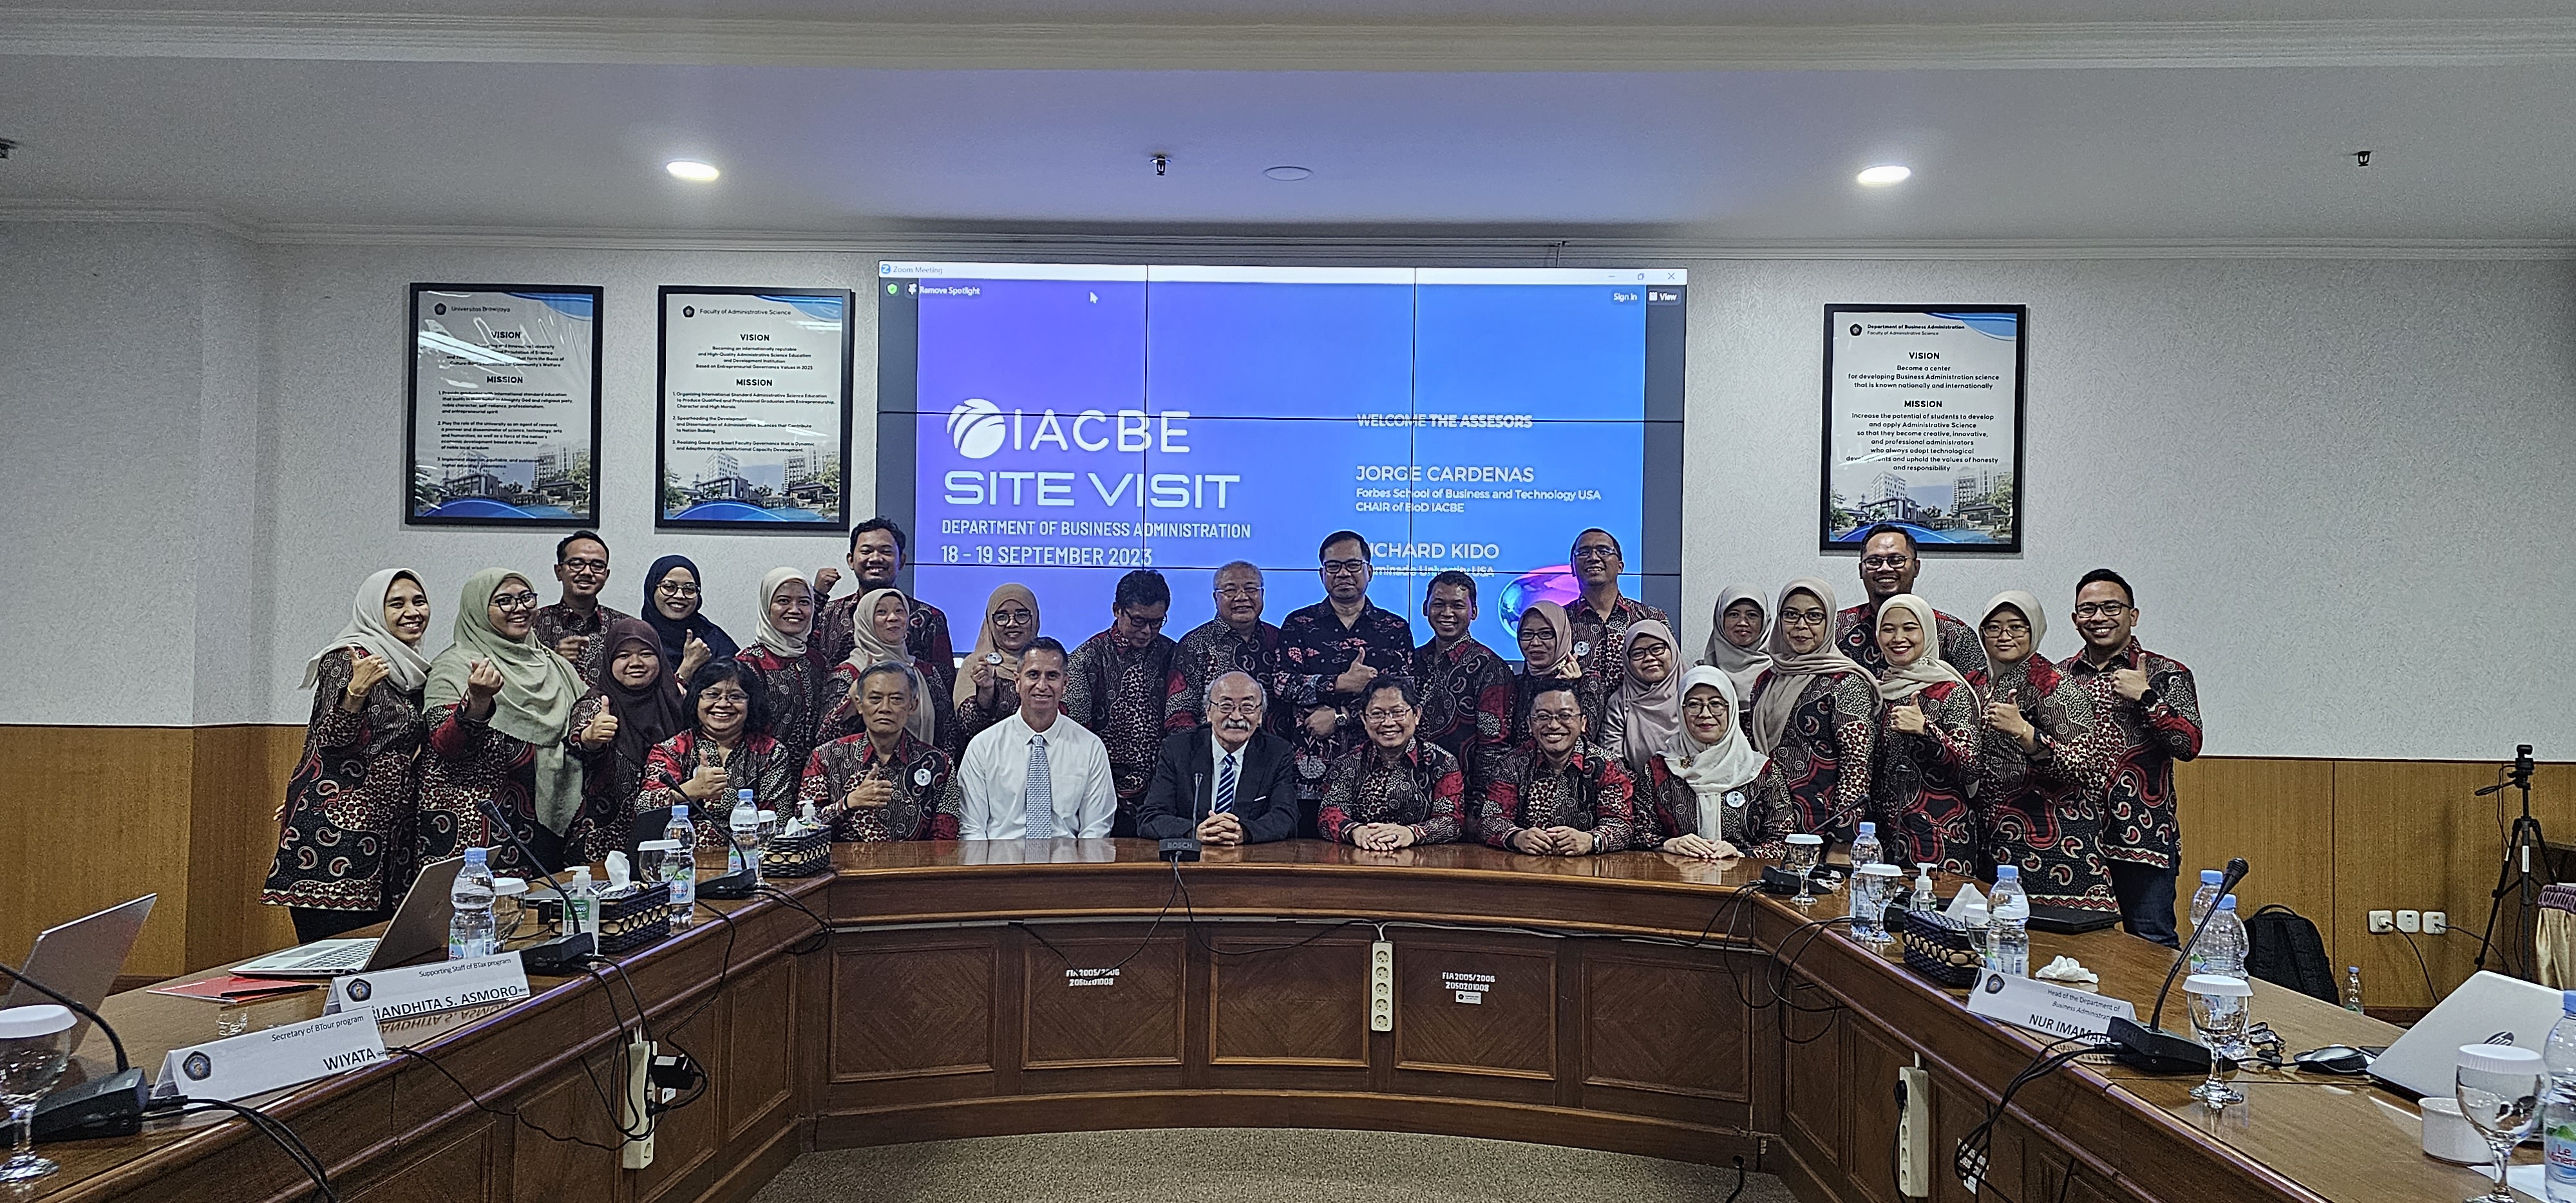 Group picture of Brawijaya University Department of Business Administration, Faculty of Administrative Science, Dean Dr. Andy Fefta Wijaya, Faculty and IACBE site visit reviewers Dr. Jorge A. Cardenas and Richard Kido